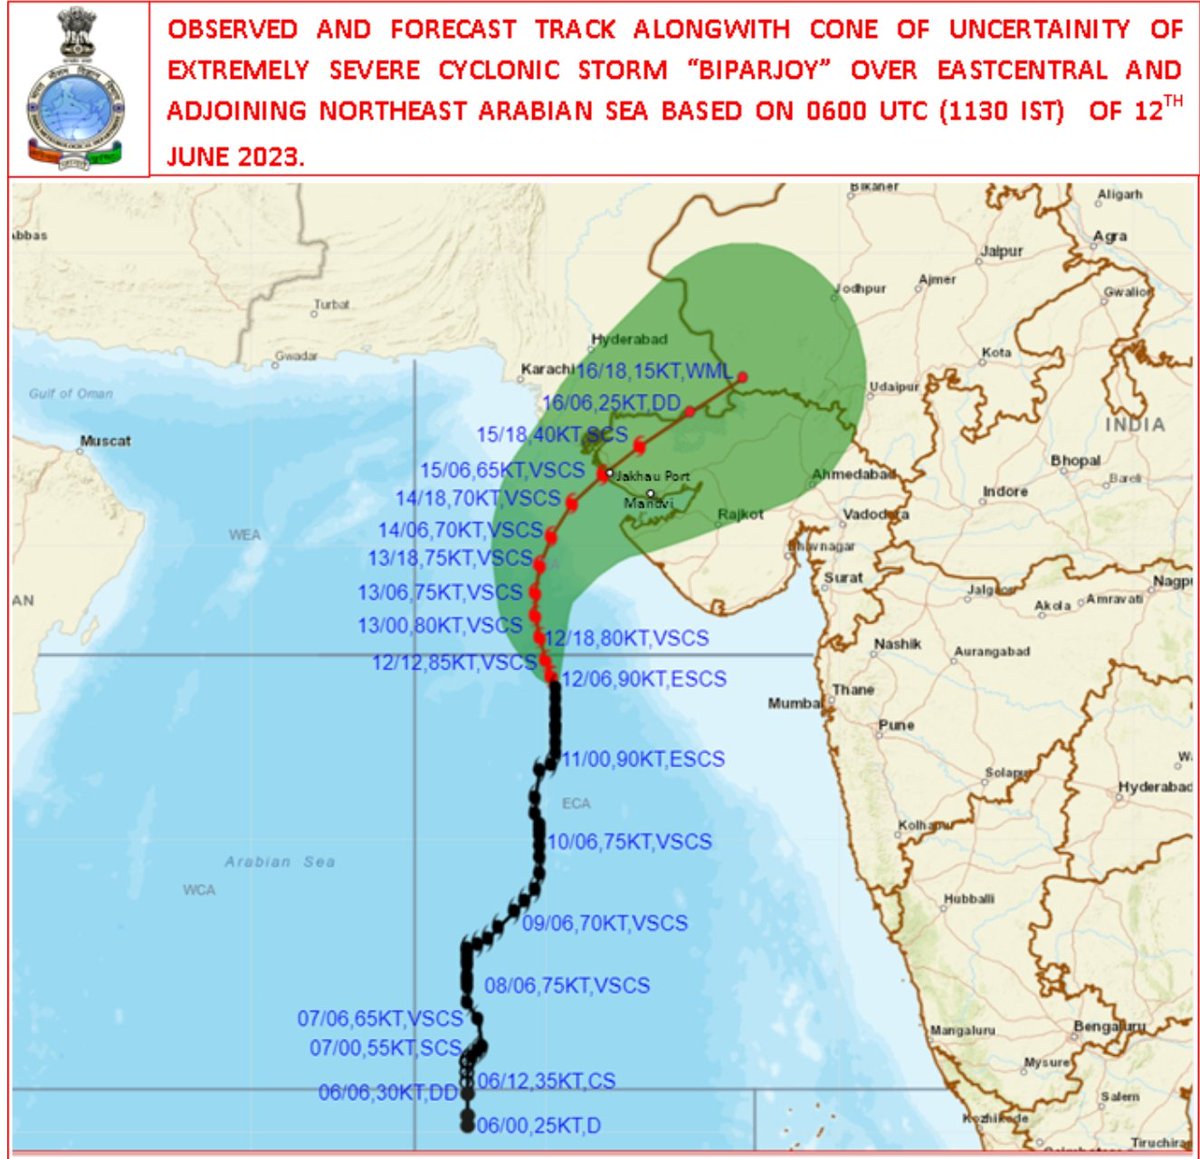 As #CycloneBiparjoy nears Guj, brief look back into tracks of AS cyclones last 5 yrs in May/June🌀

2019: Very Severe #CycloneVayu
2020: Severe #CycloneNisarga
2021: Extremely Severe #CycloneTauktae
2023: Extremely Severe #CycloneBiparjoy 

I think we know what this means.
Pc-IMD